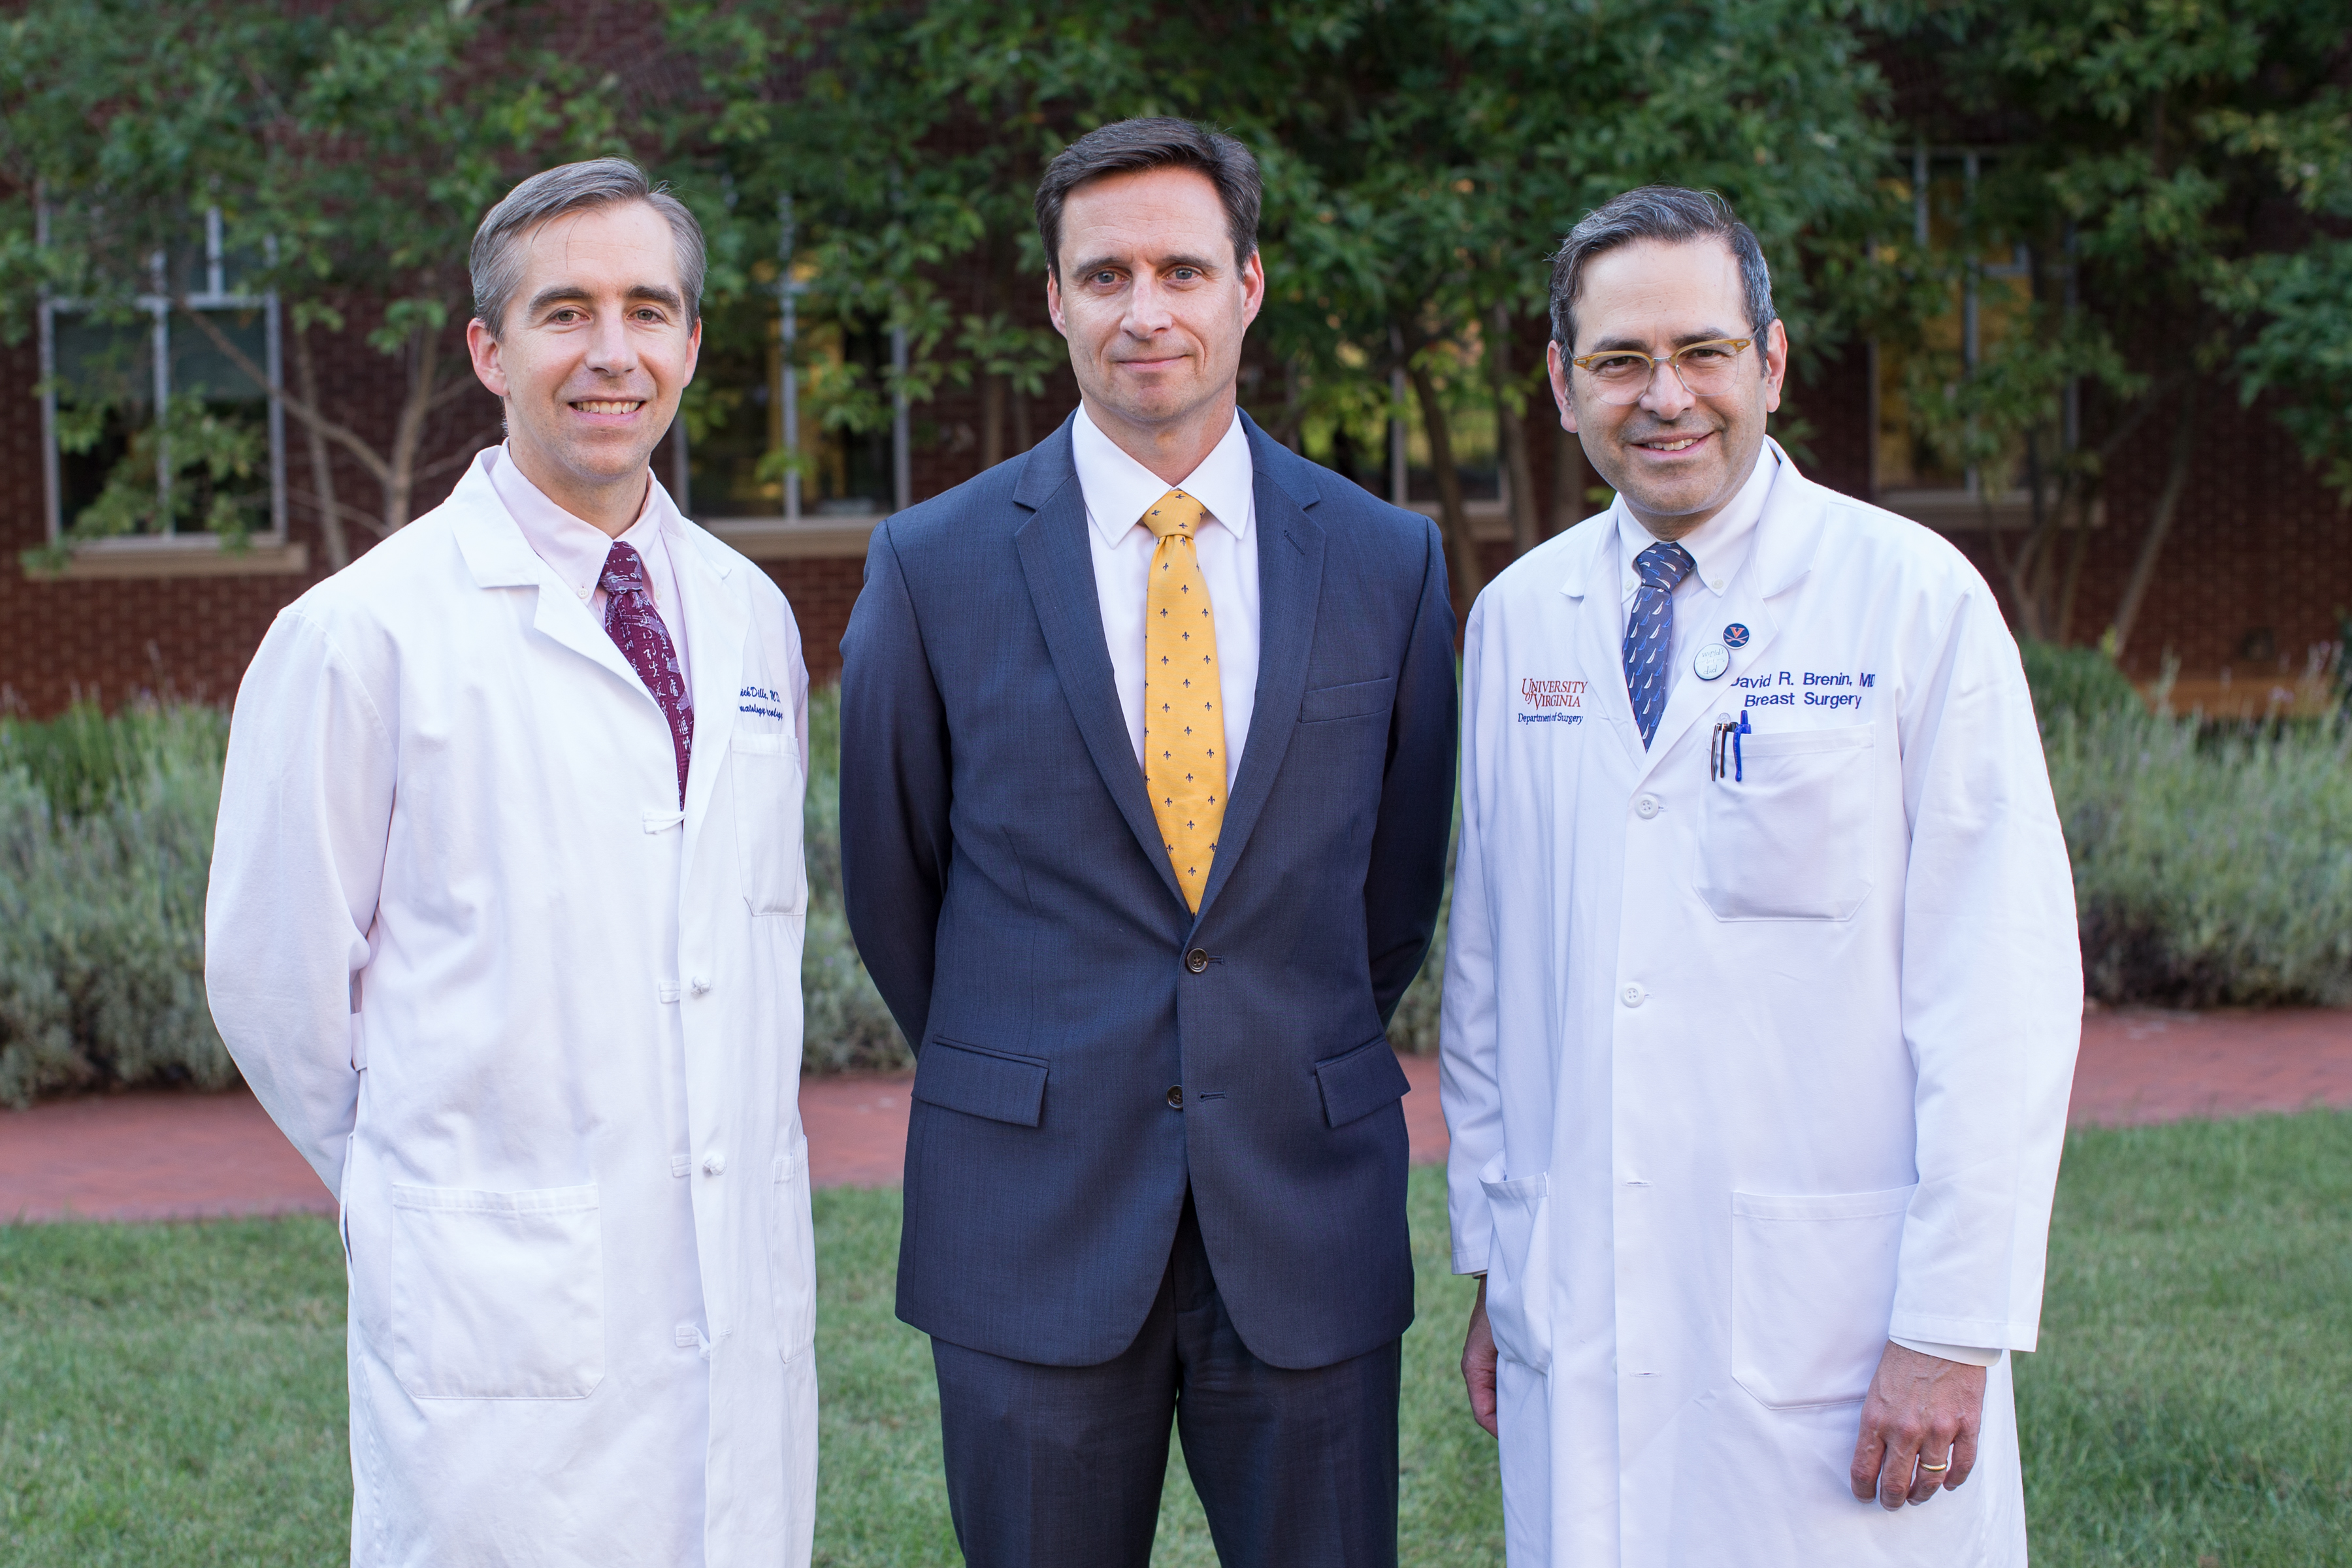 From left to right: Patrick Dillon, MD, Richard Price, PhD, and David Brenin, MD